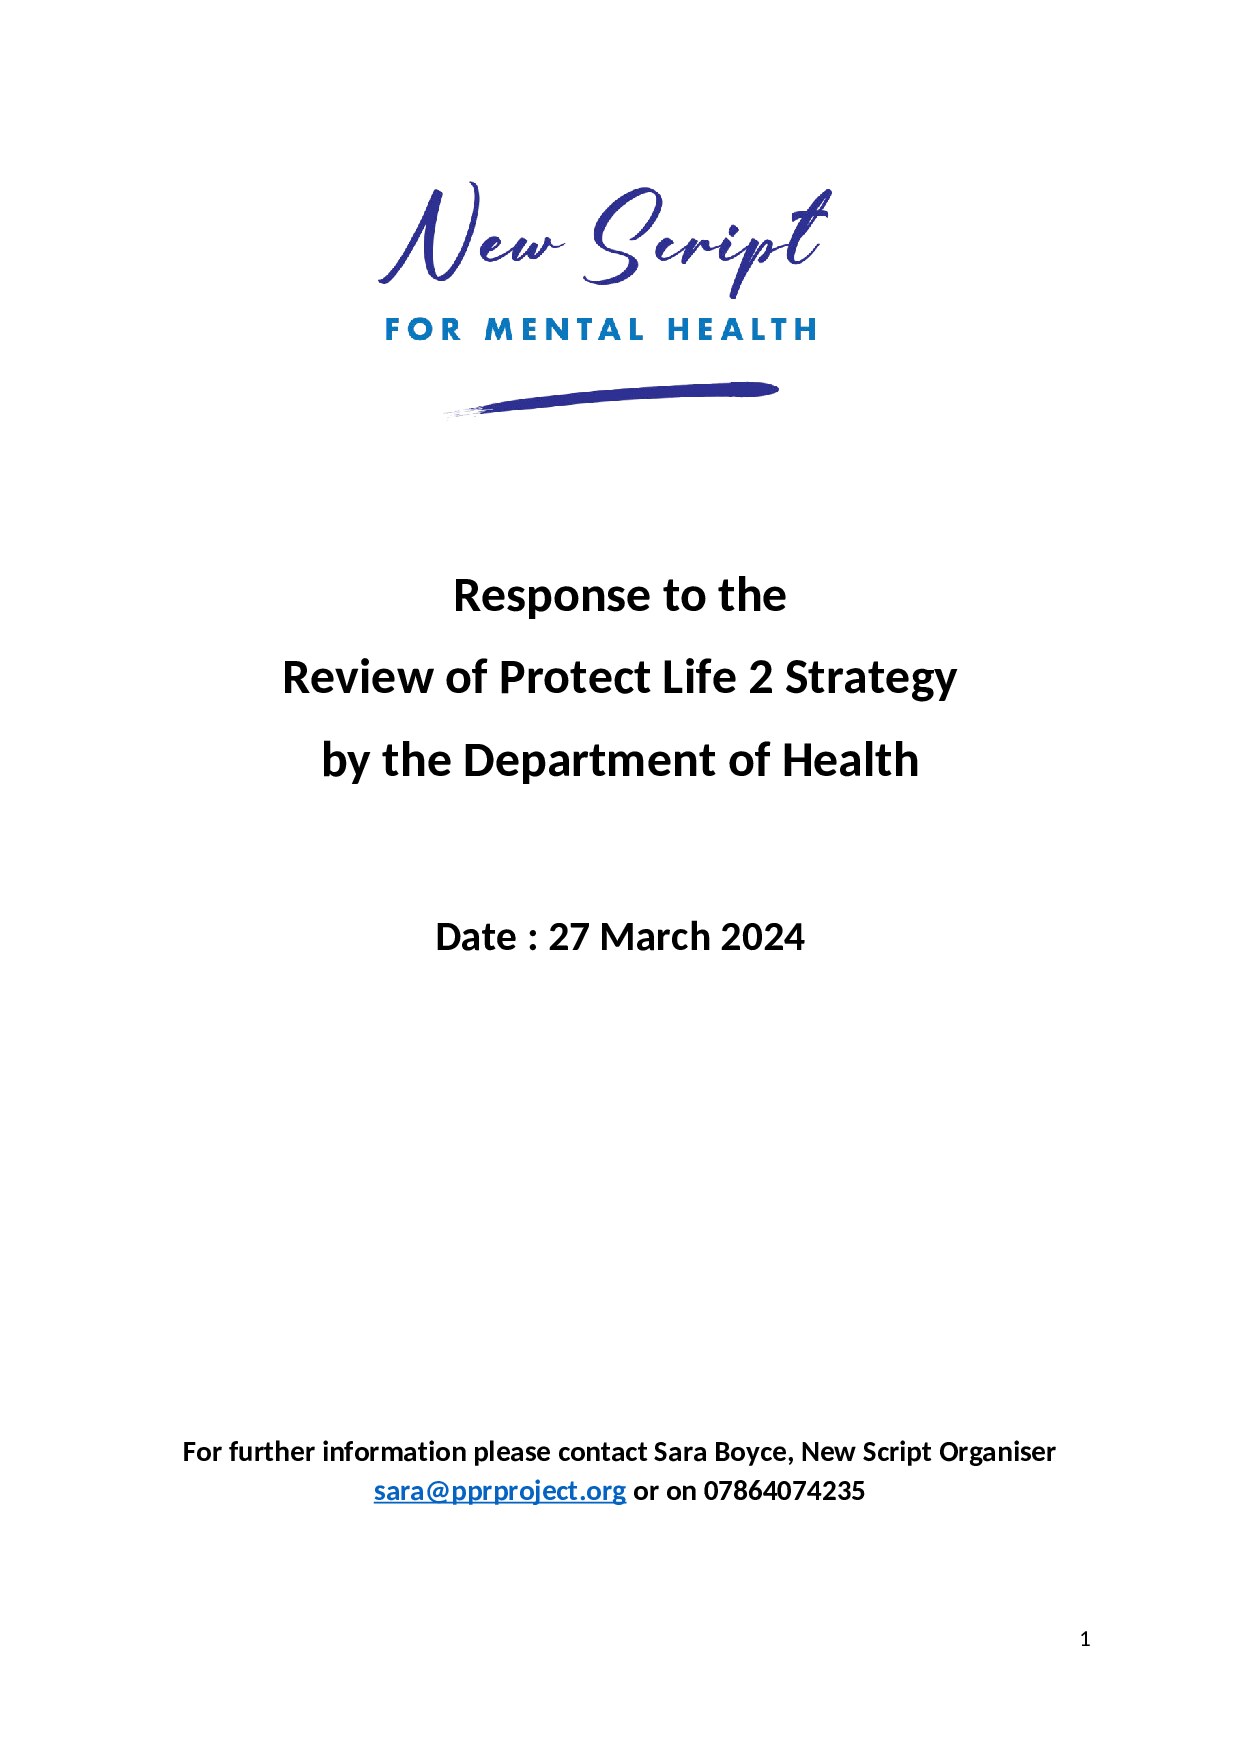 Response to the Review of Protect Life 2 Strategy by the Department of Health